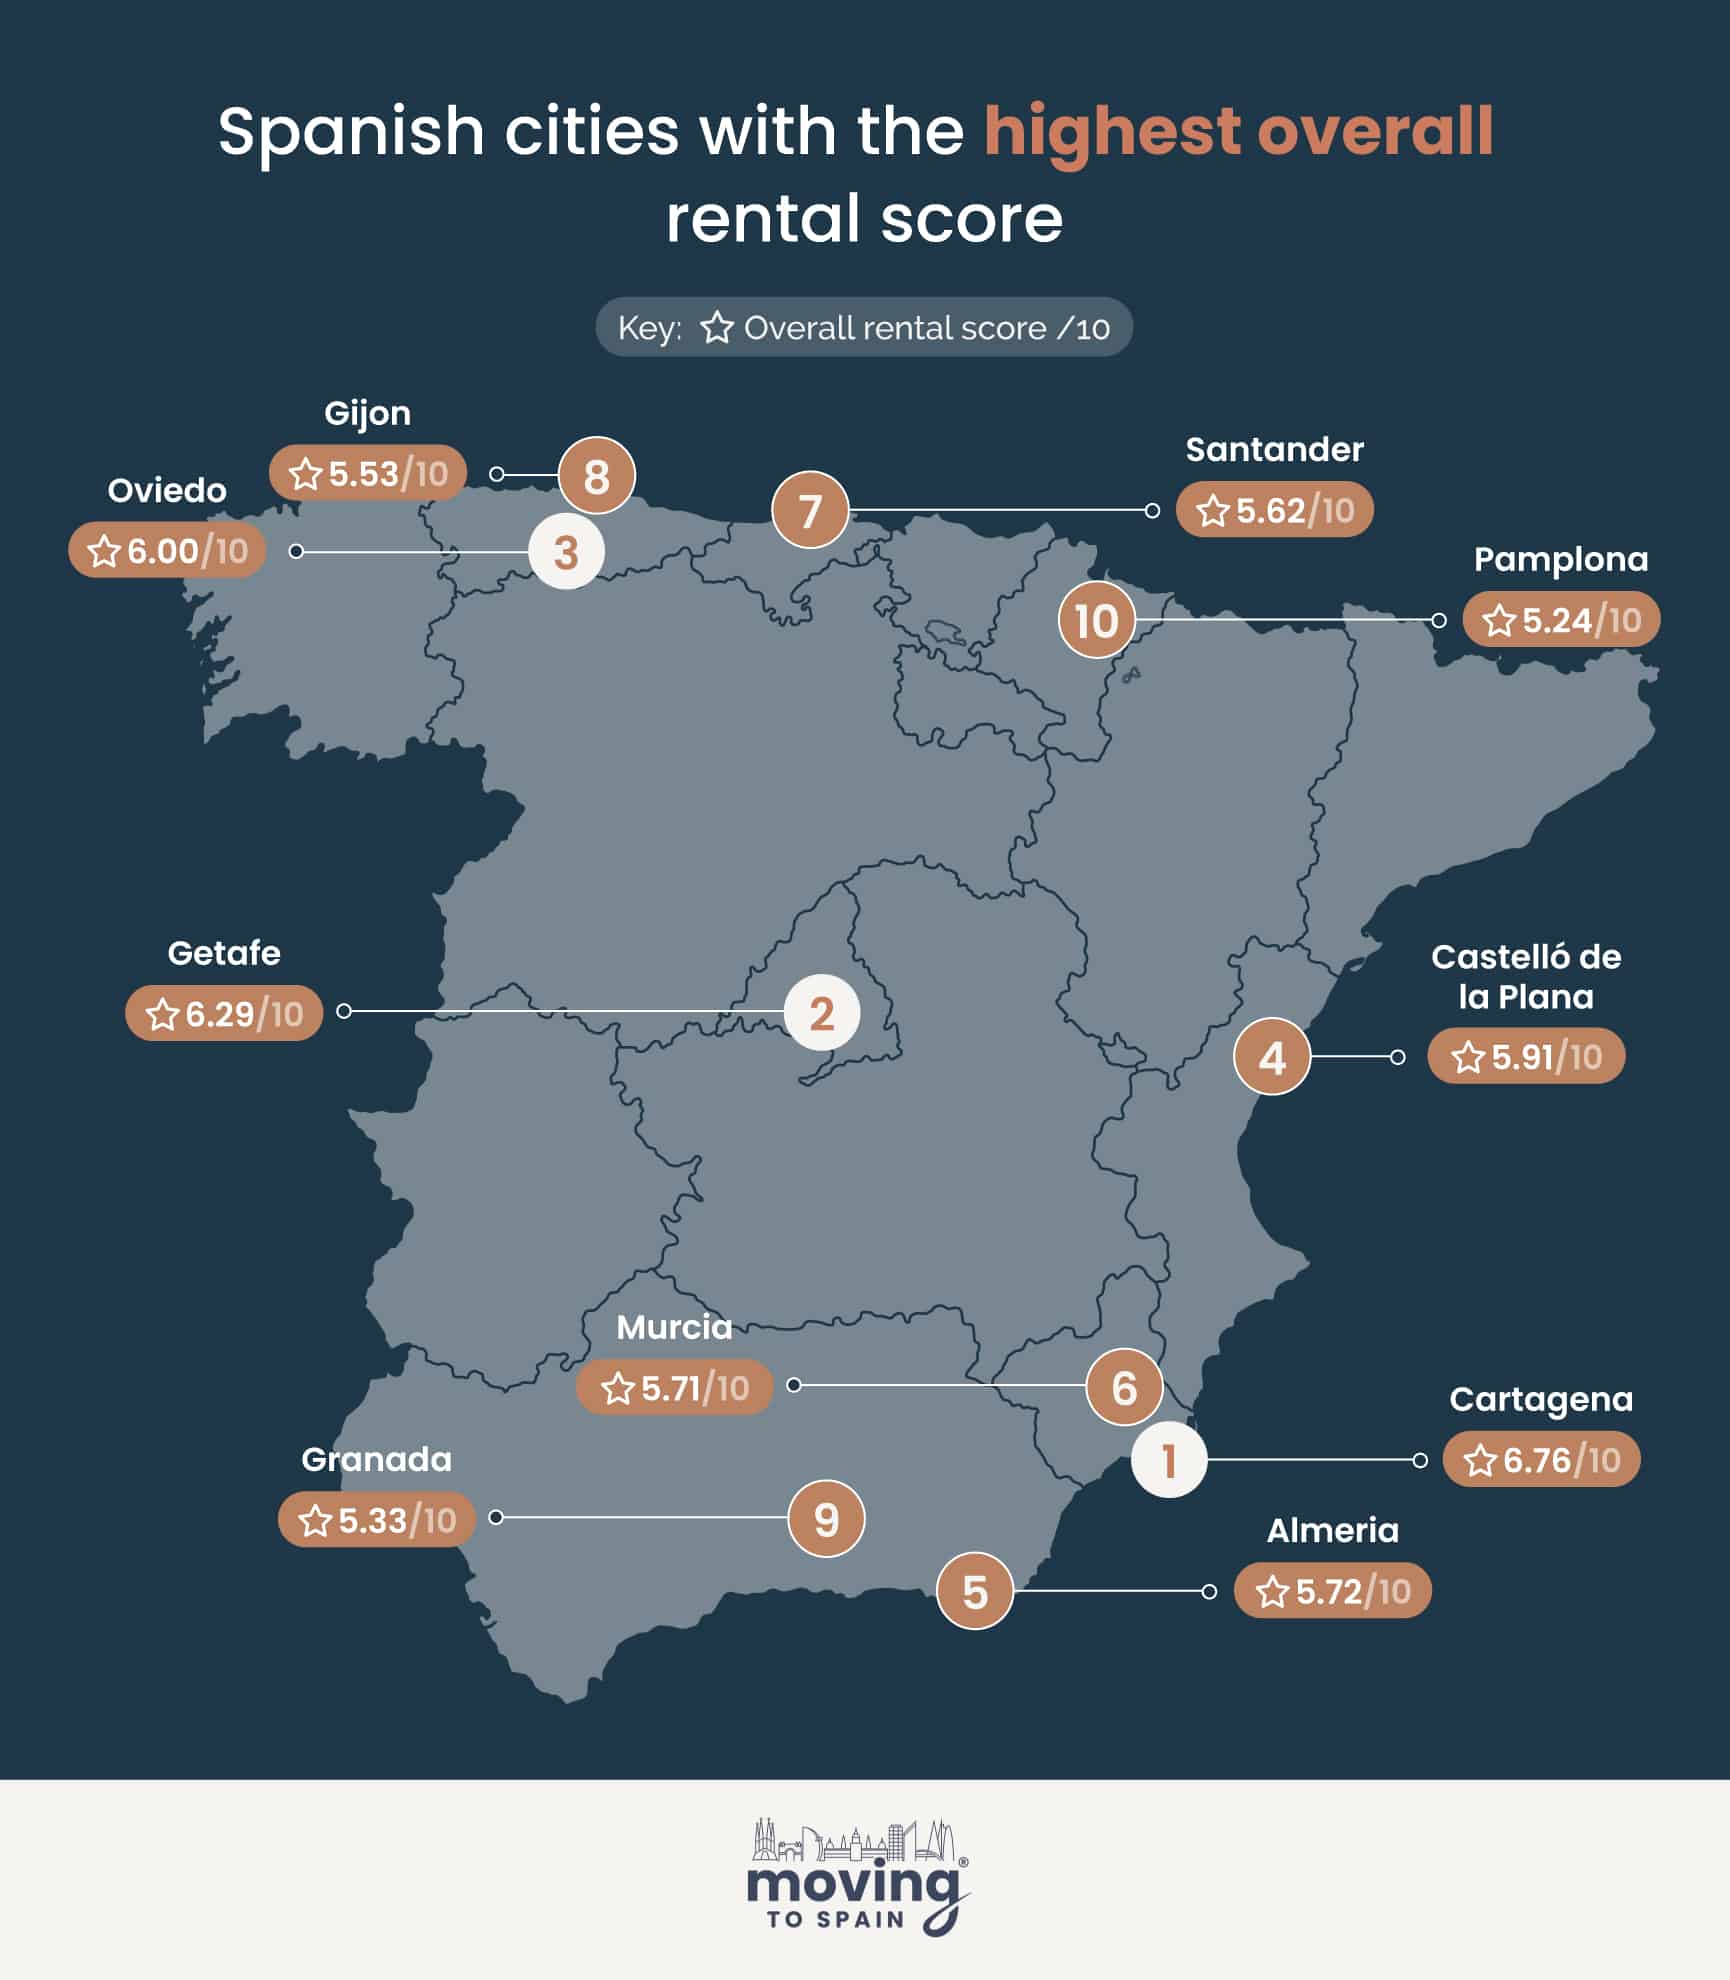 Map of Spain showing the best cities for singles and couples to rent a property.